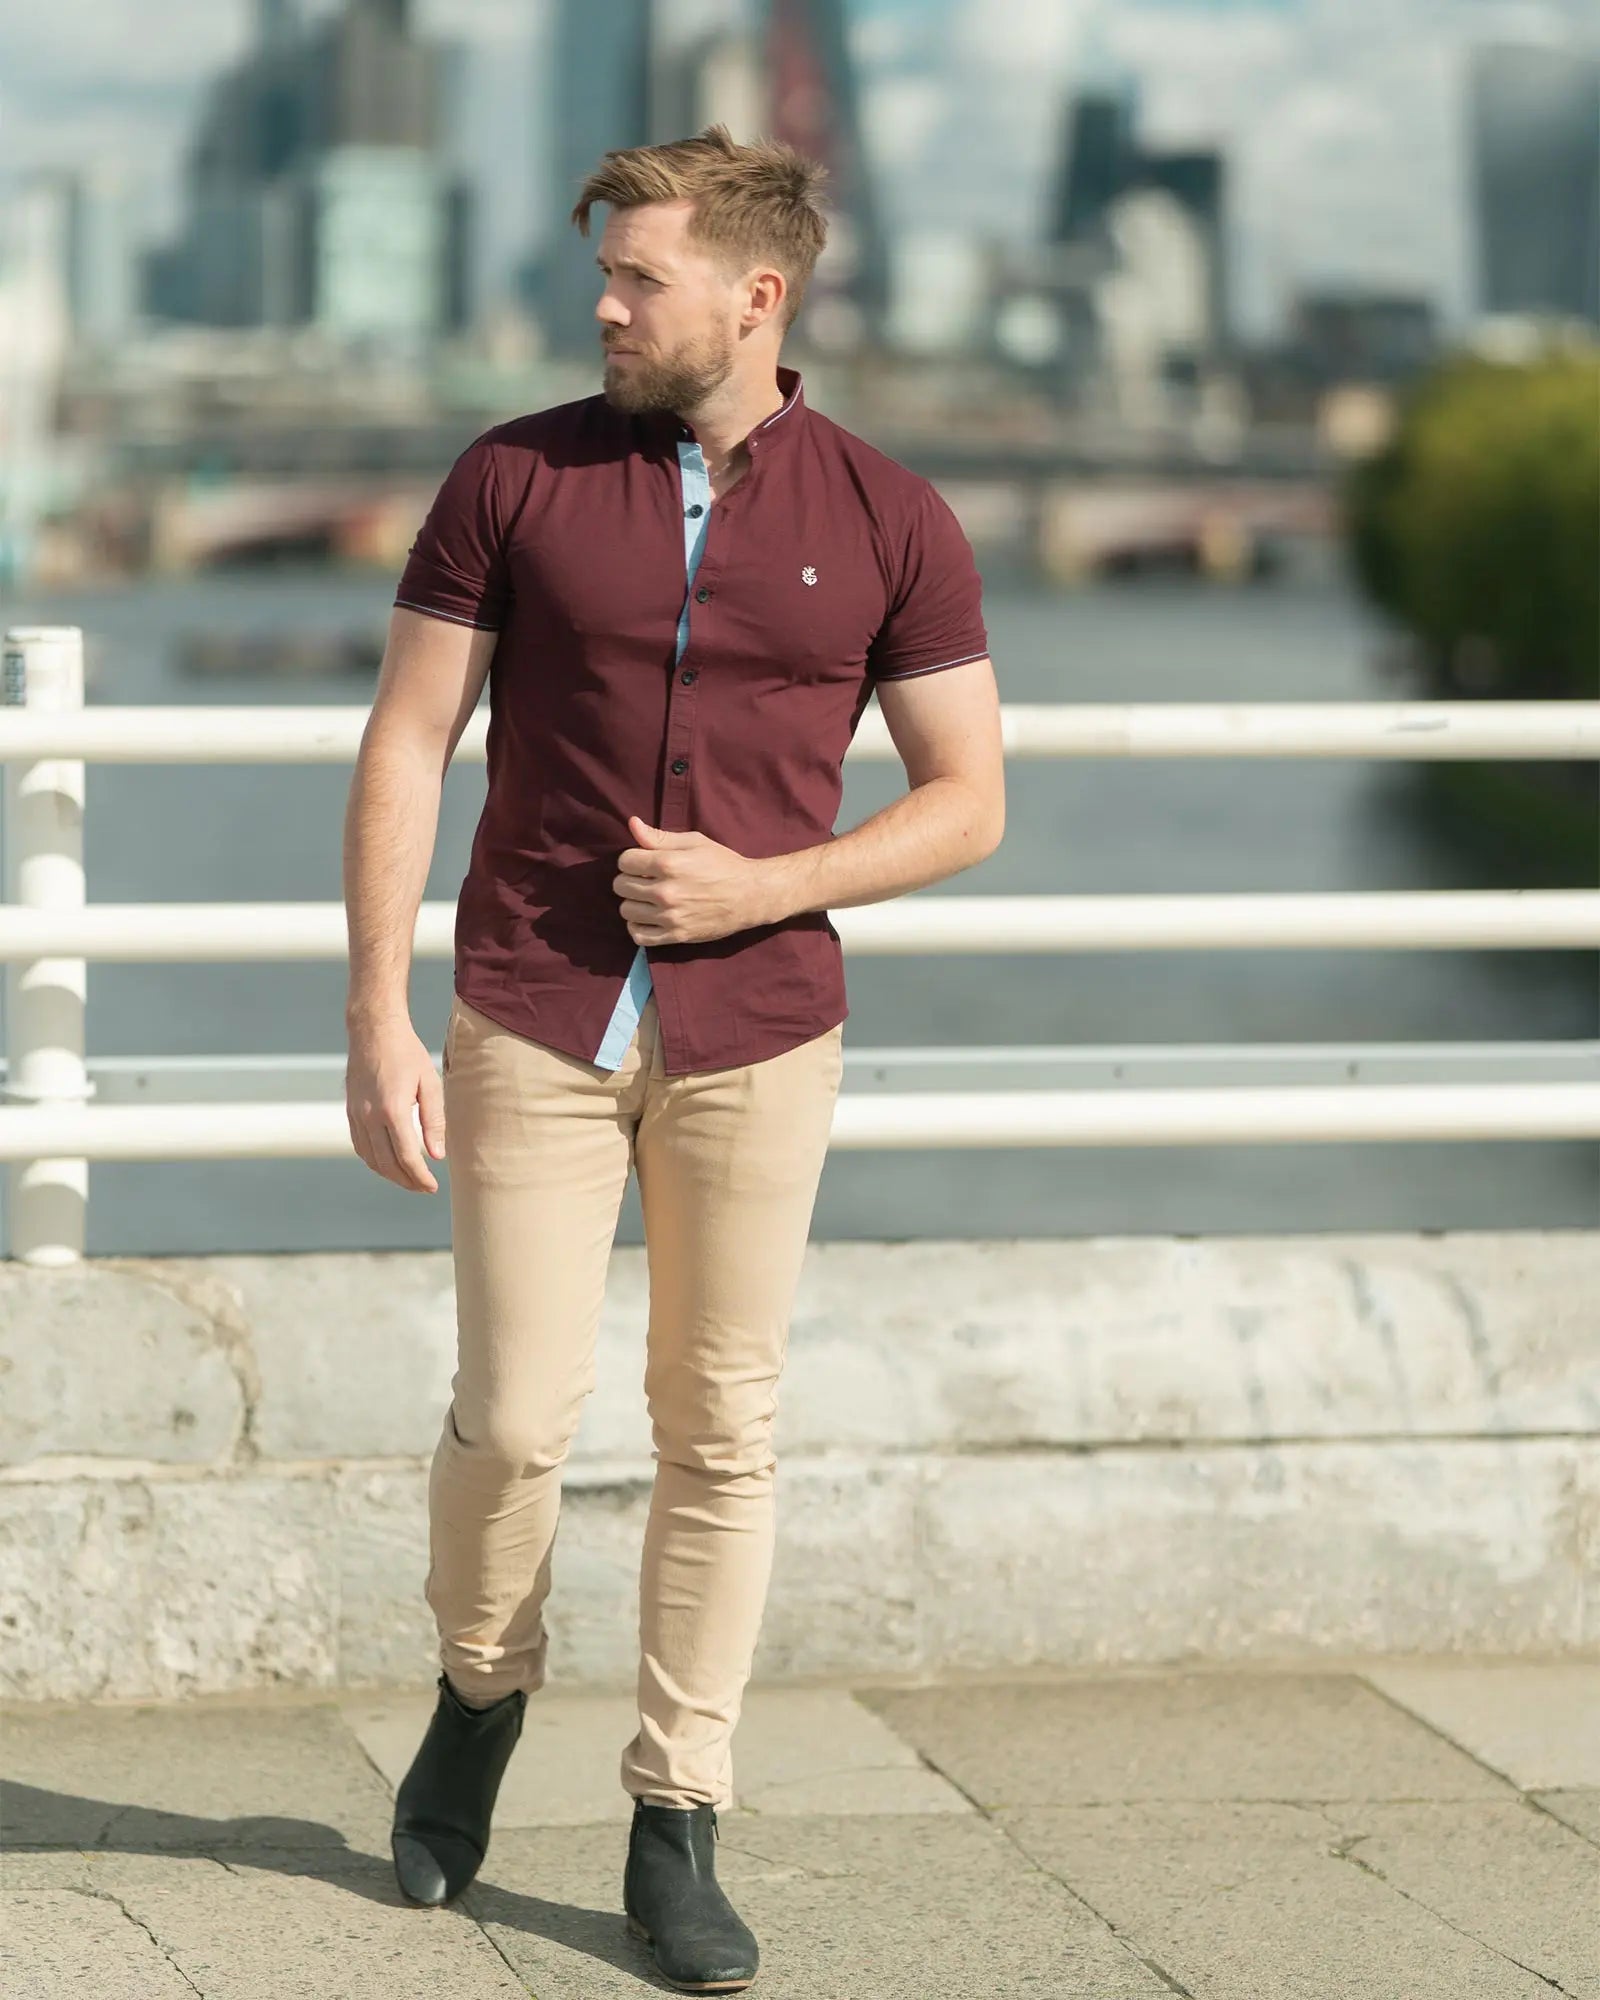 LCY London | Capsule Collection - Men's Hybrid Short Sleeved Shirt | Full Buttoned LCY London